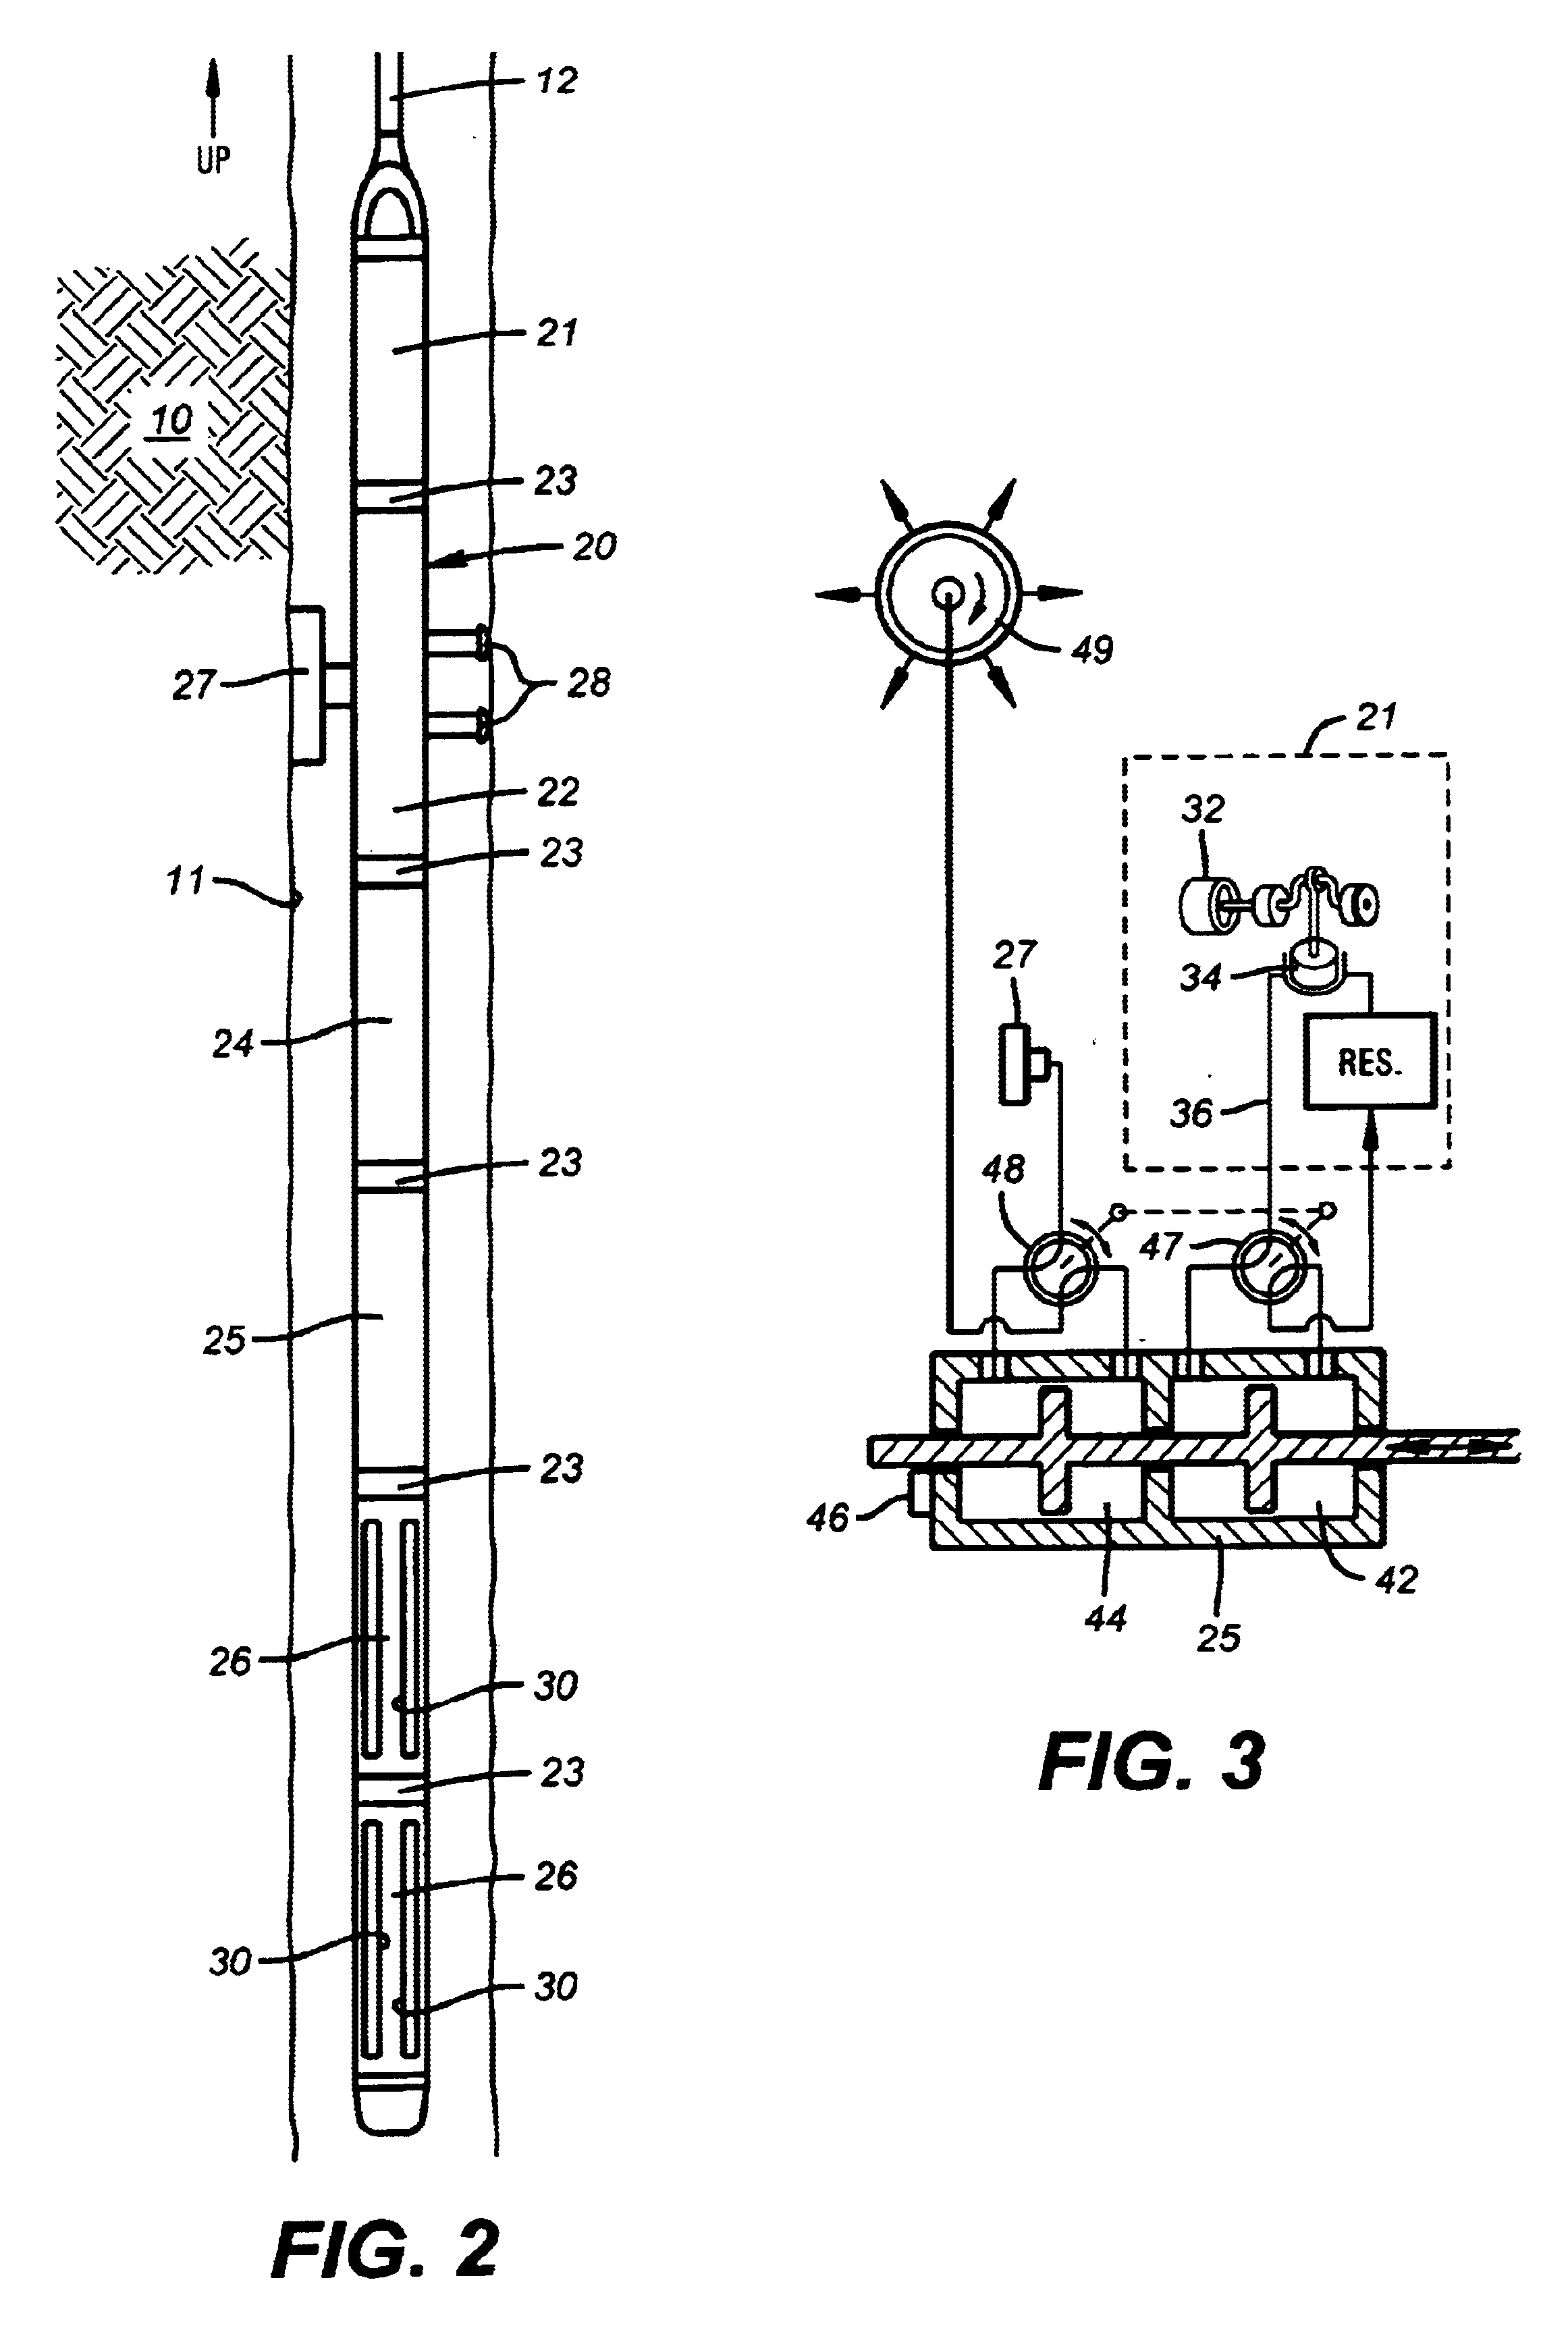 Method and apparatus for supercharging downhole sample tanks